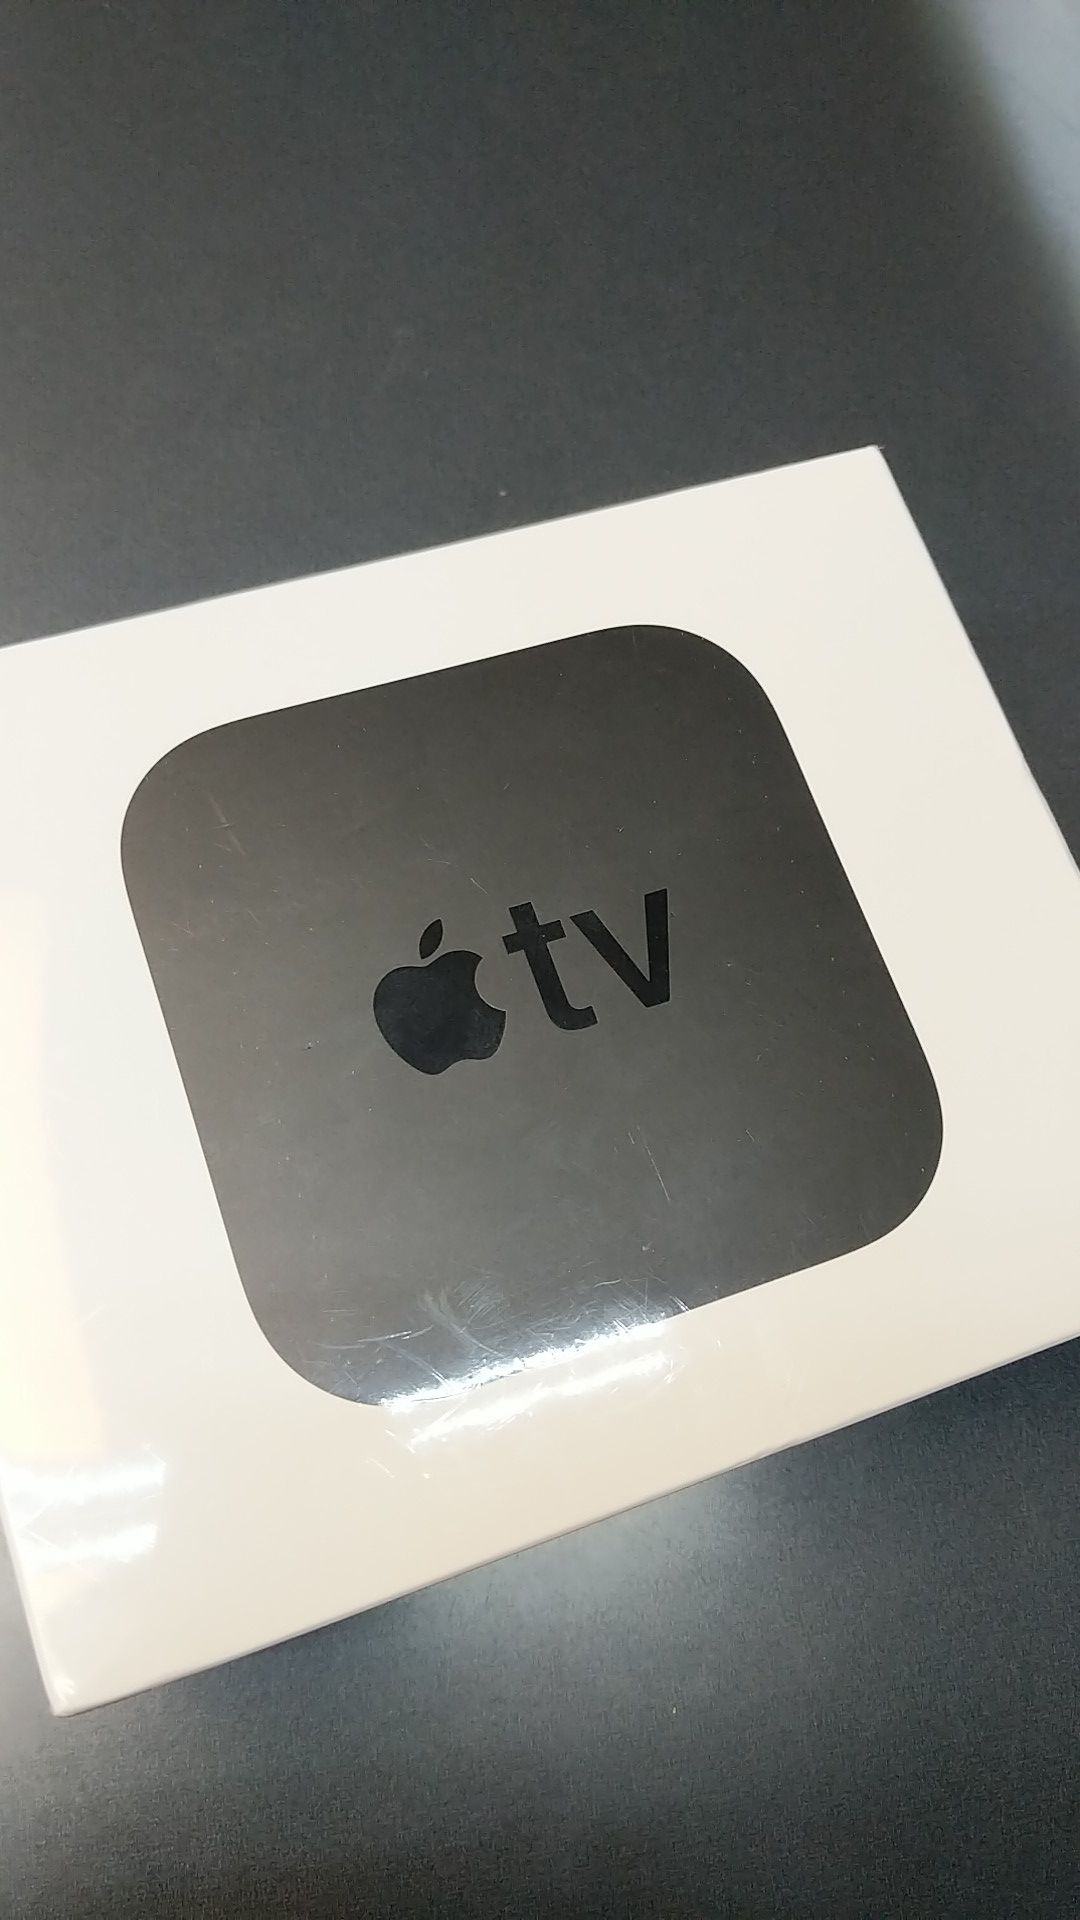 APPLE TV A1625 NEW IN BOX 32GB